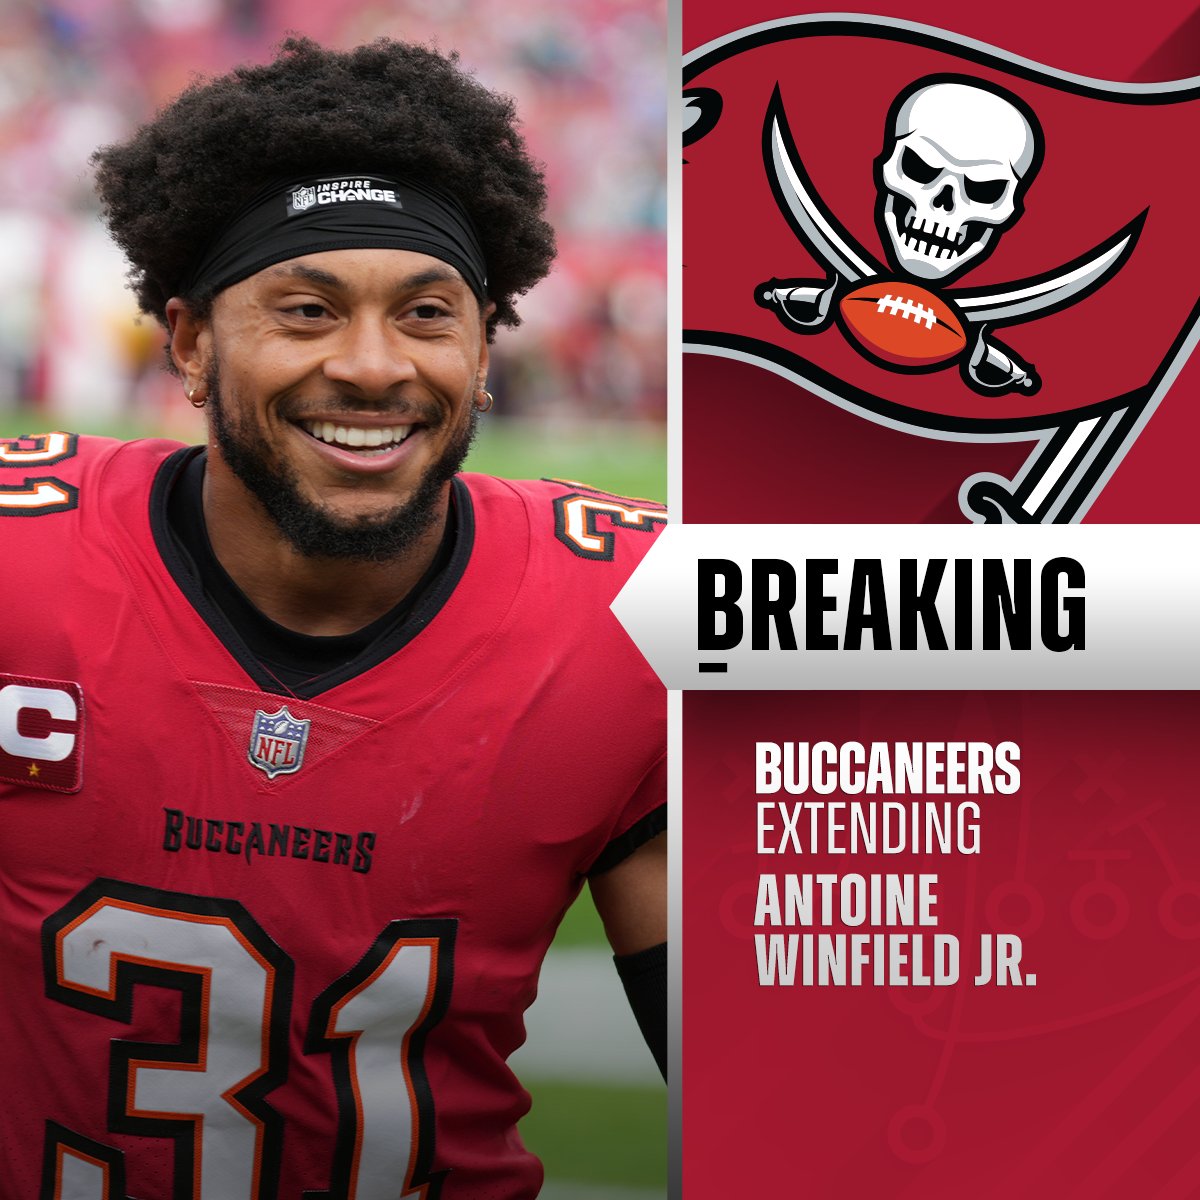 BREAKING: Buccaneers safety Antoine Winfield Jr. agrees to four-year, $84.1M deal with $45M guaranteed, making him the highest-paid DB in NFL history. (via @rapsheet)